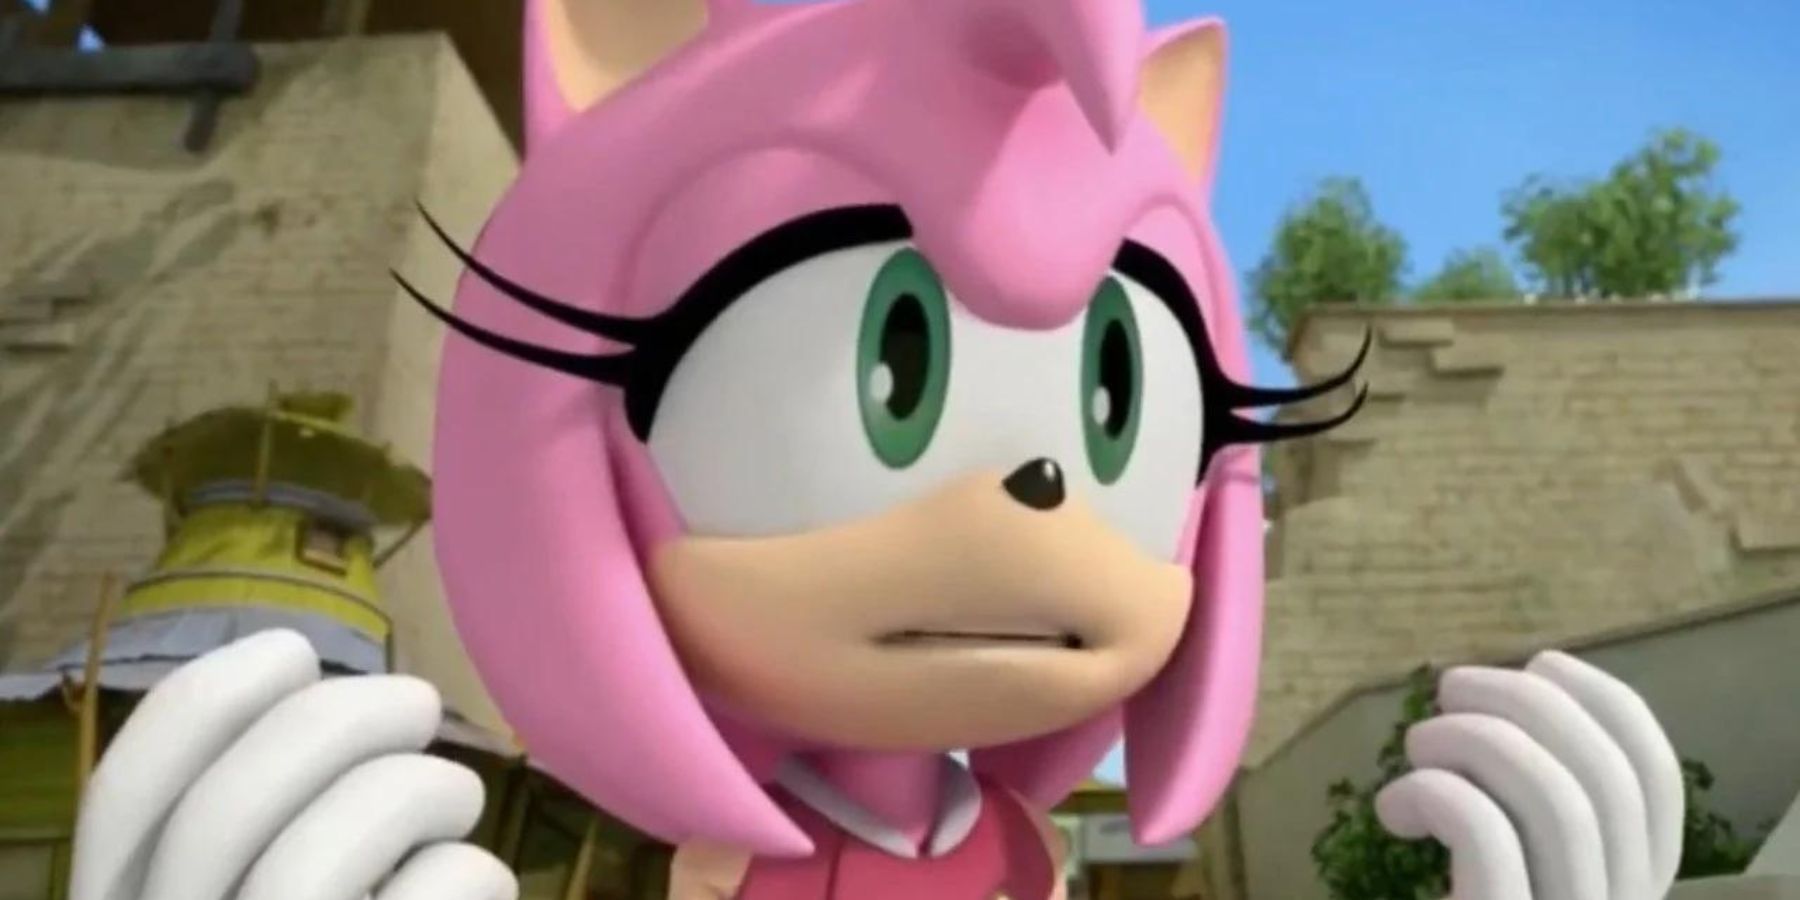 Sonic giving flowers to Amy  Sonic and amy, Hedgehog movie, Sonic